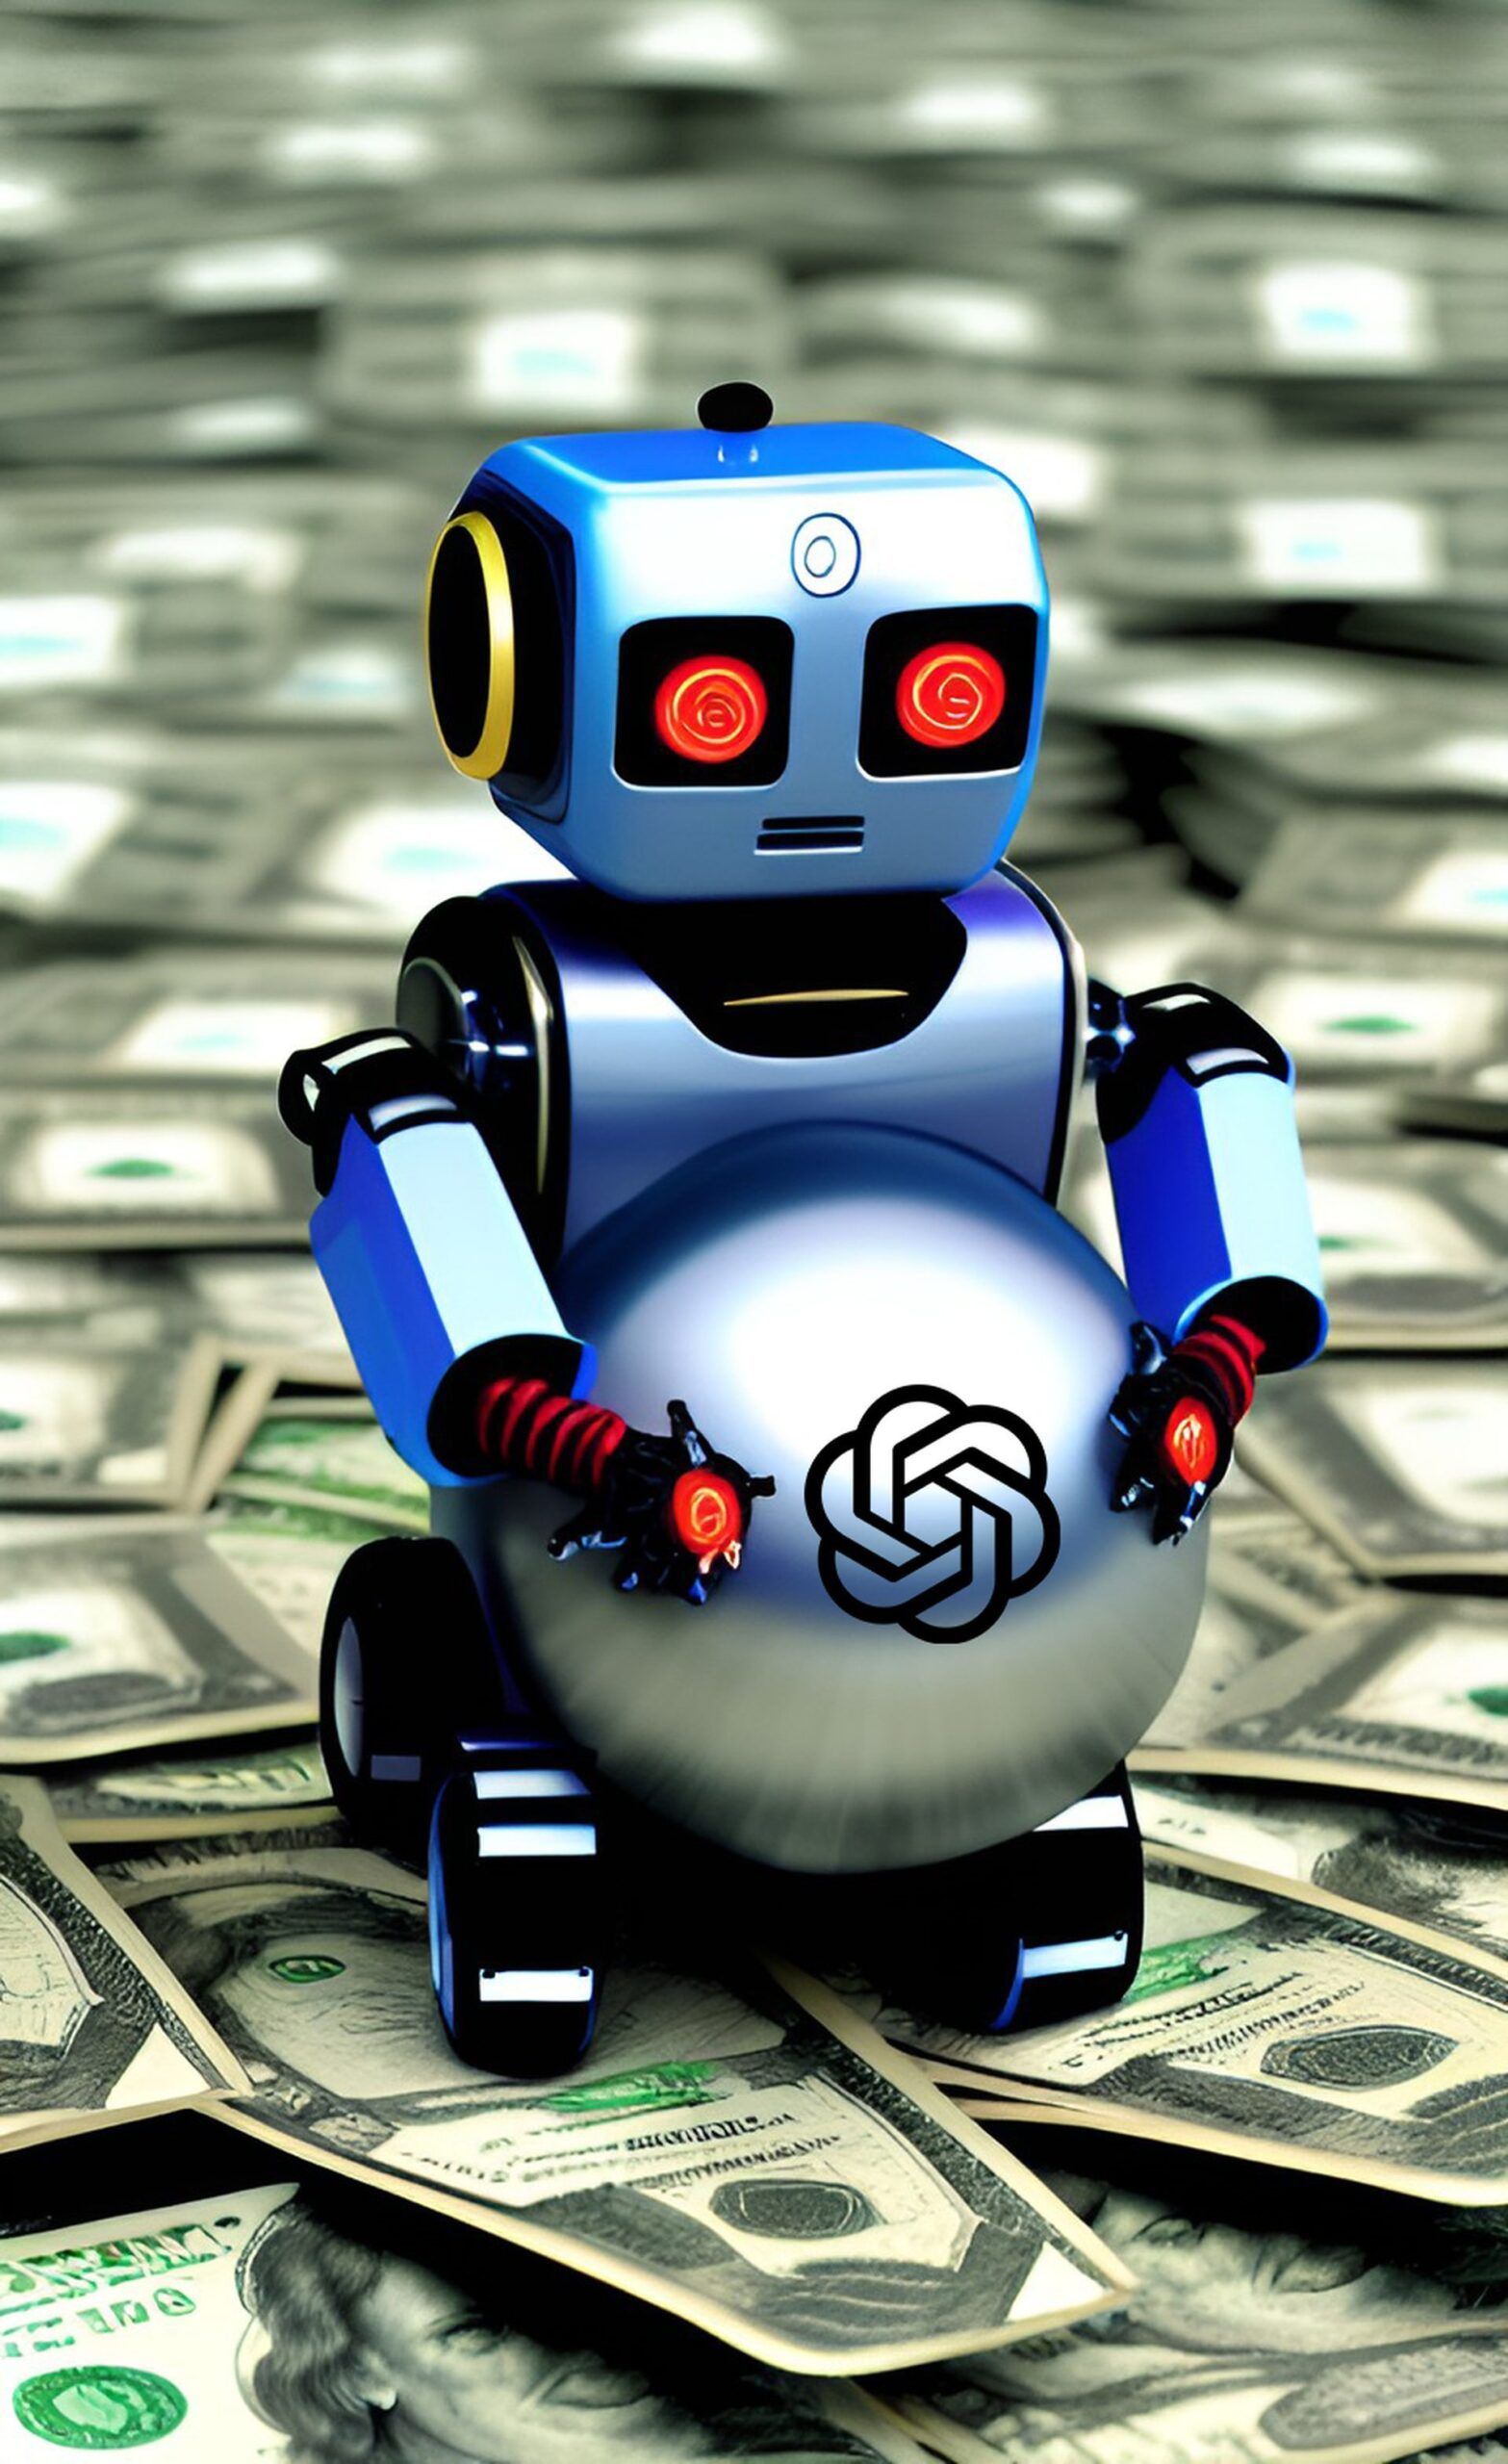 You can find everything about ChatGPT net worth (OpenAI net worth) in this article. How does ChatGPT make money? Keep reading and find out!